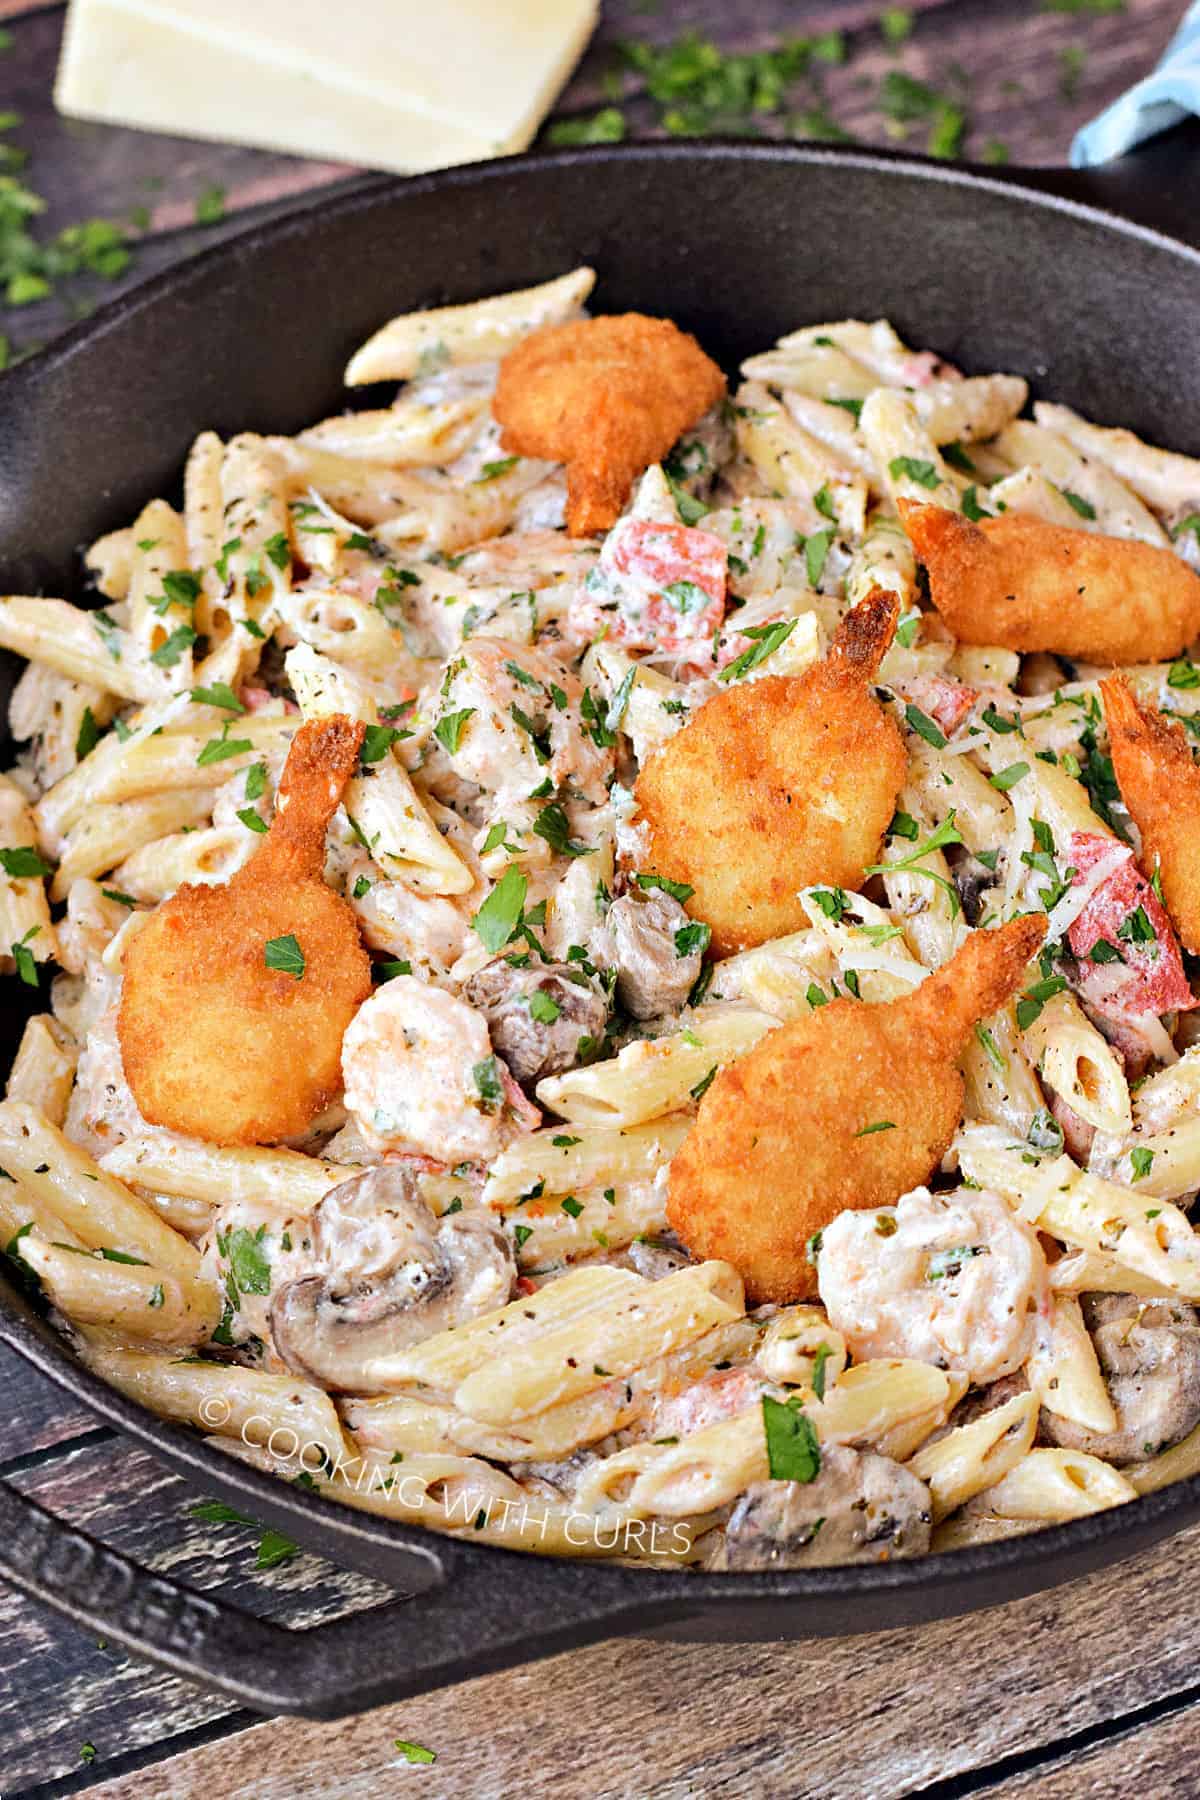 Penne pasta mixed with tomatoes, mushrooms, shrimp, and topped with breaded shrimp in a cast iron skillet.